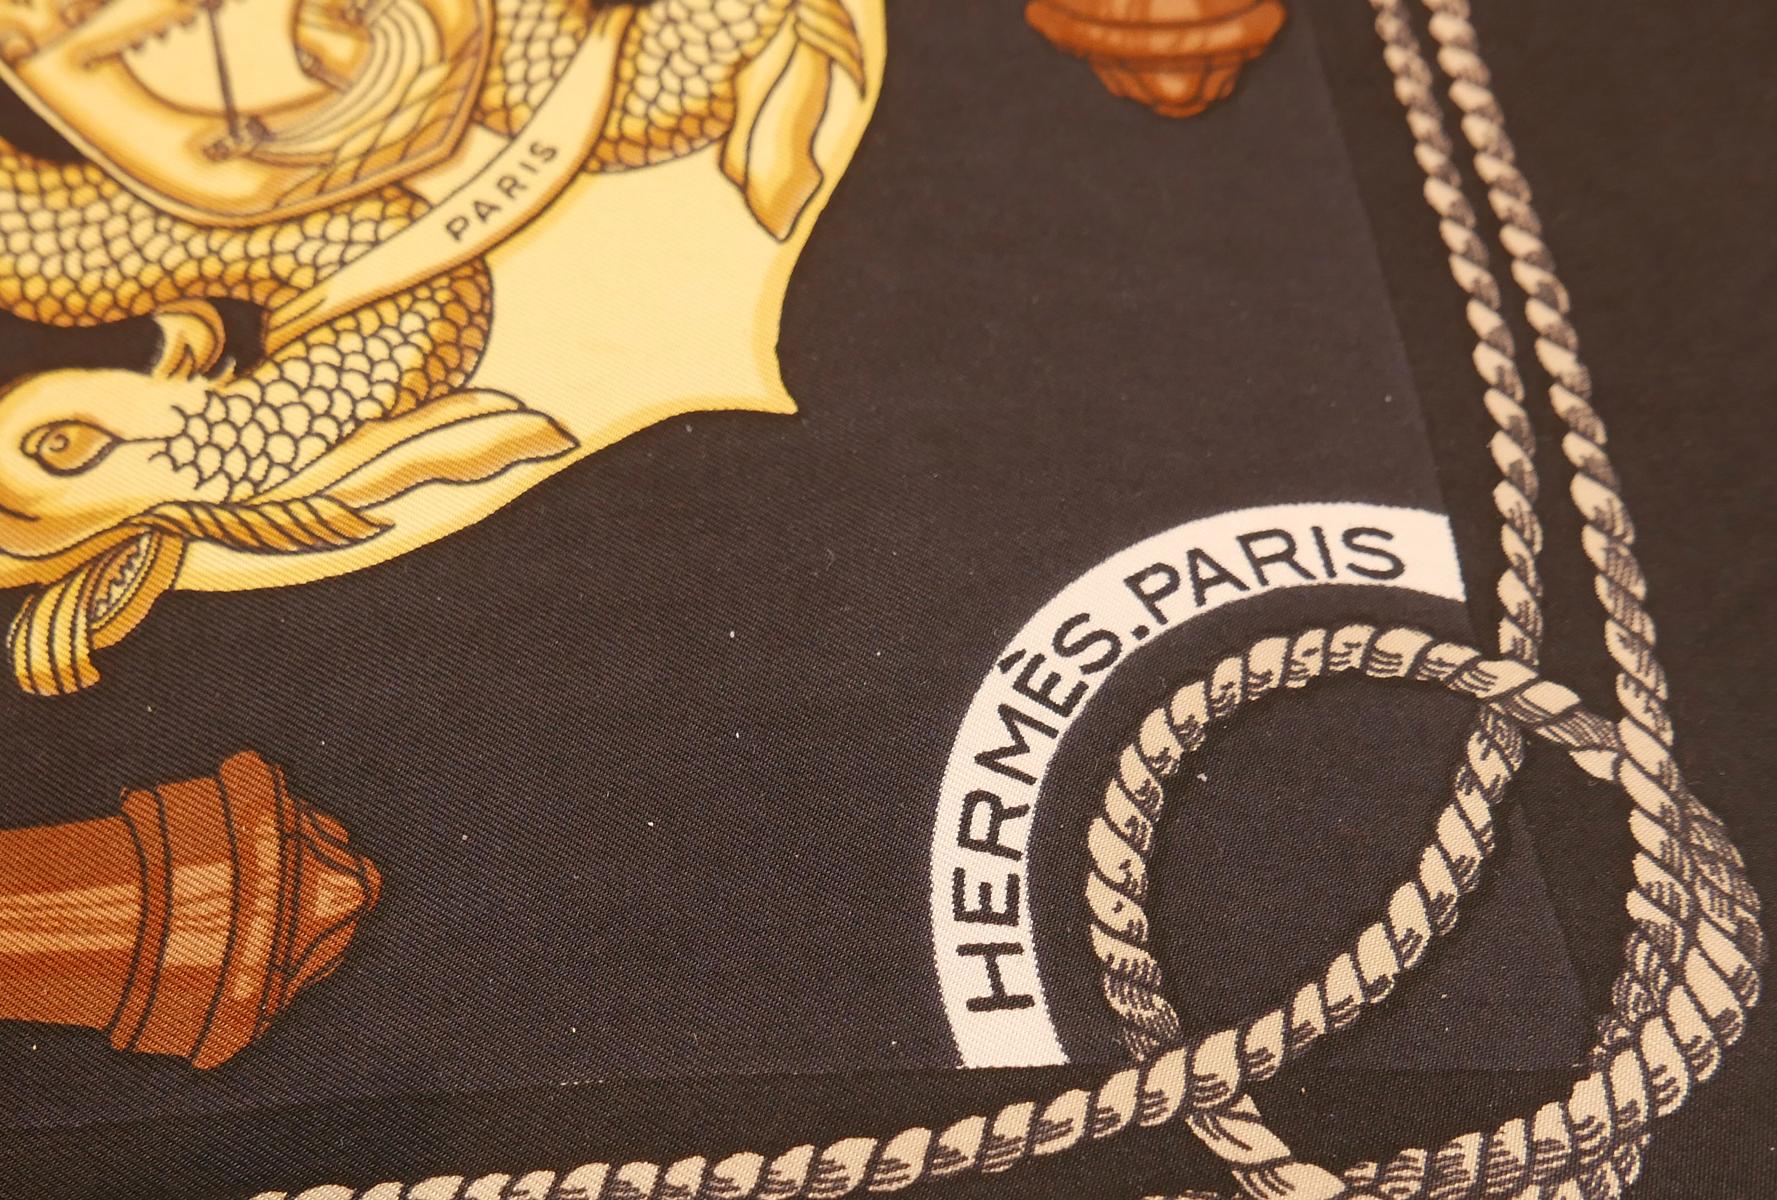 This vintage Hermes scarf, “Coaching”, originally designed by Christane Vauzelles, features a nautical design with ships and anchors on a black background.  In excellent condition, this silk scarf measures 35” square and is signed “Hermes Paris”.